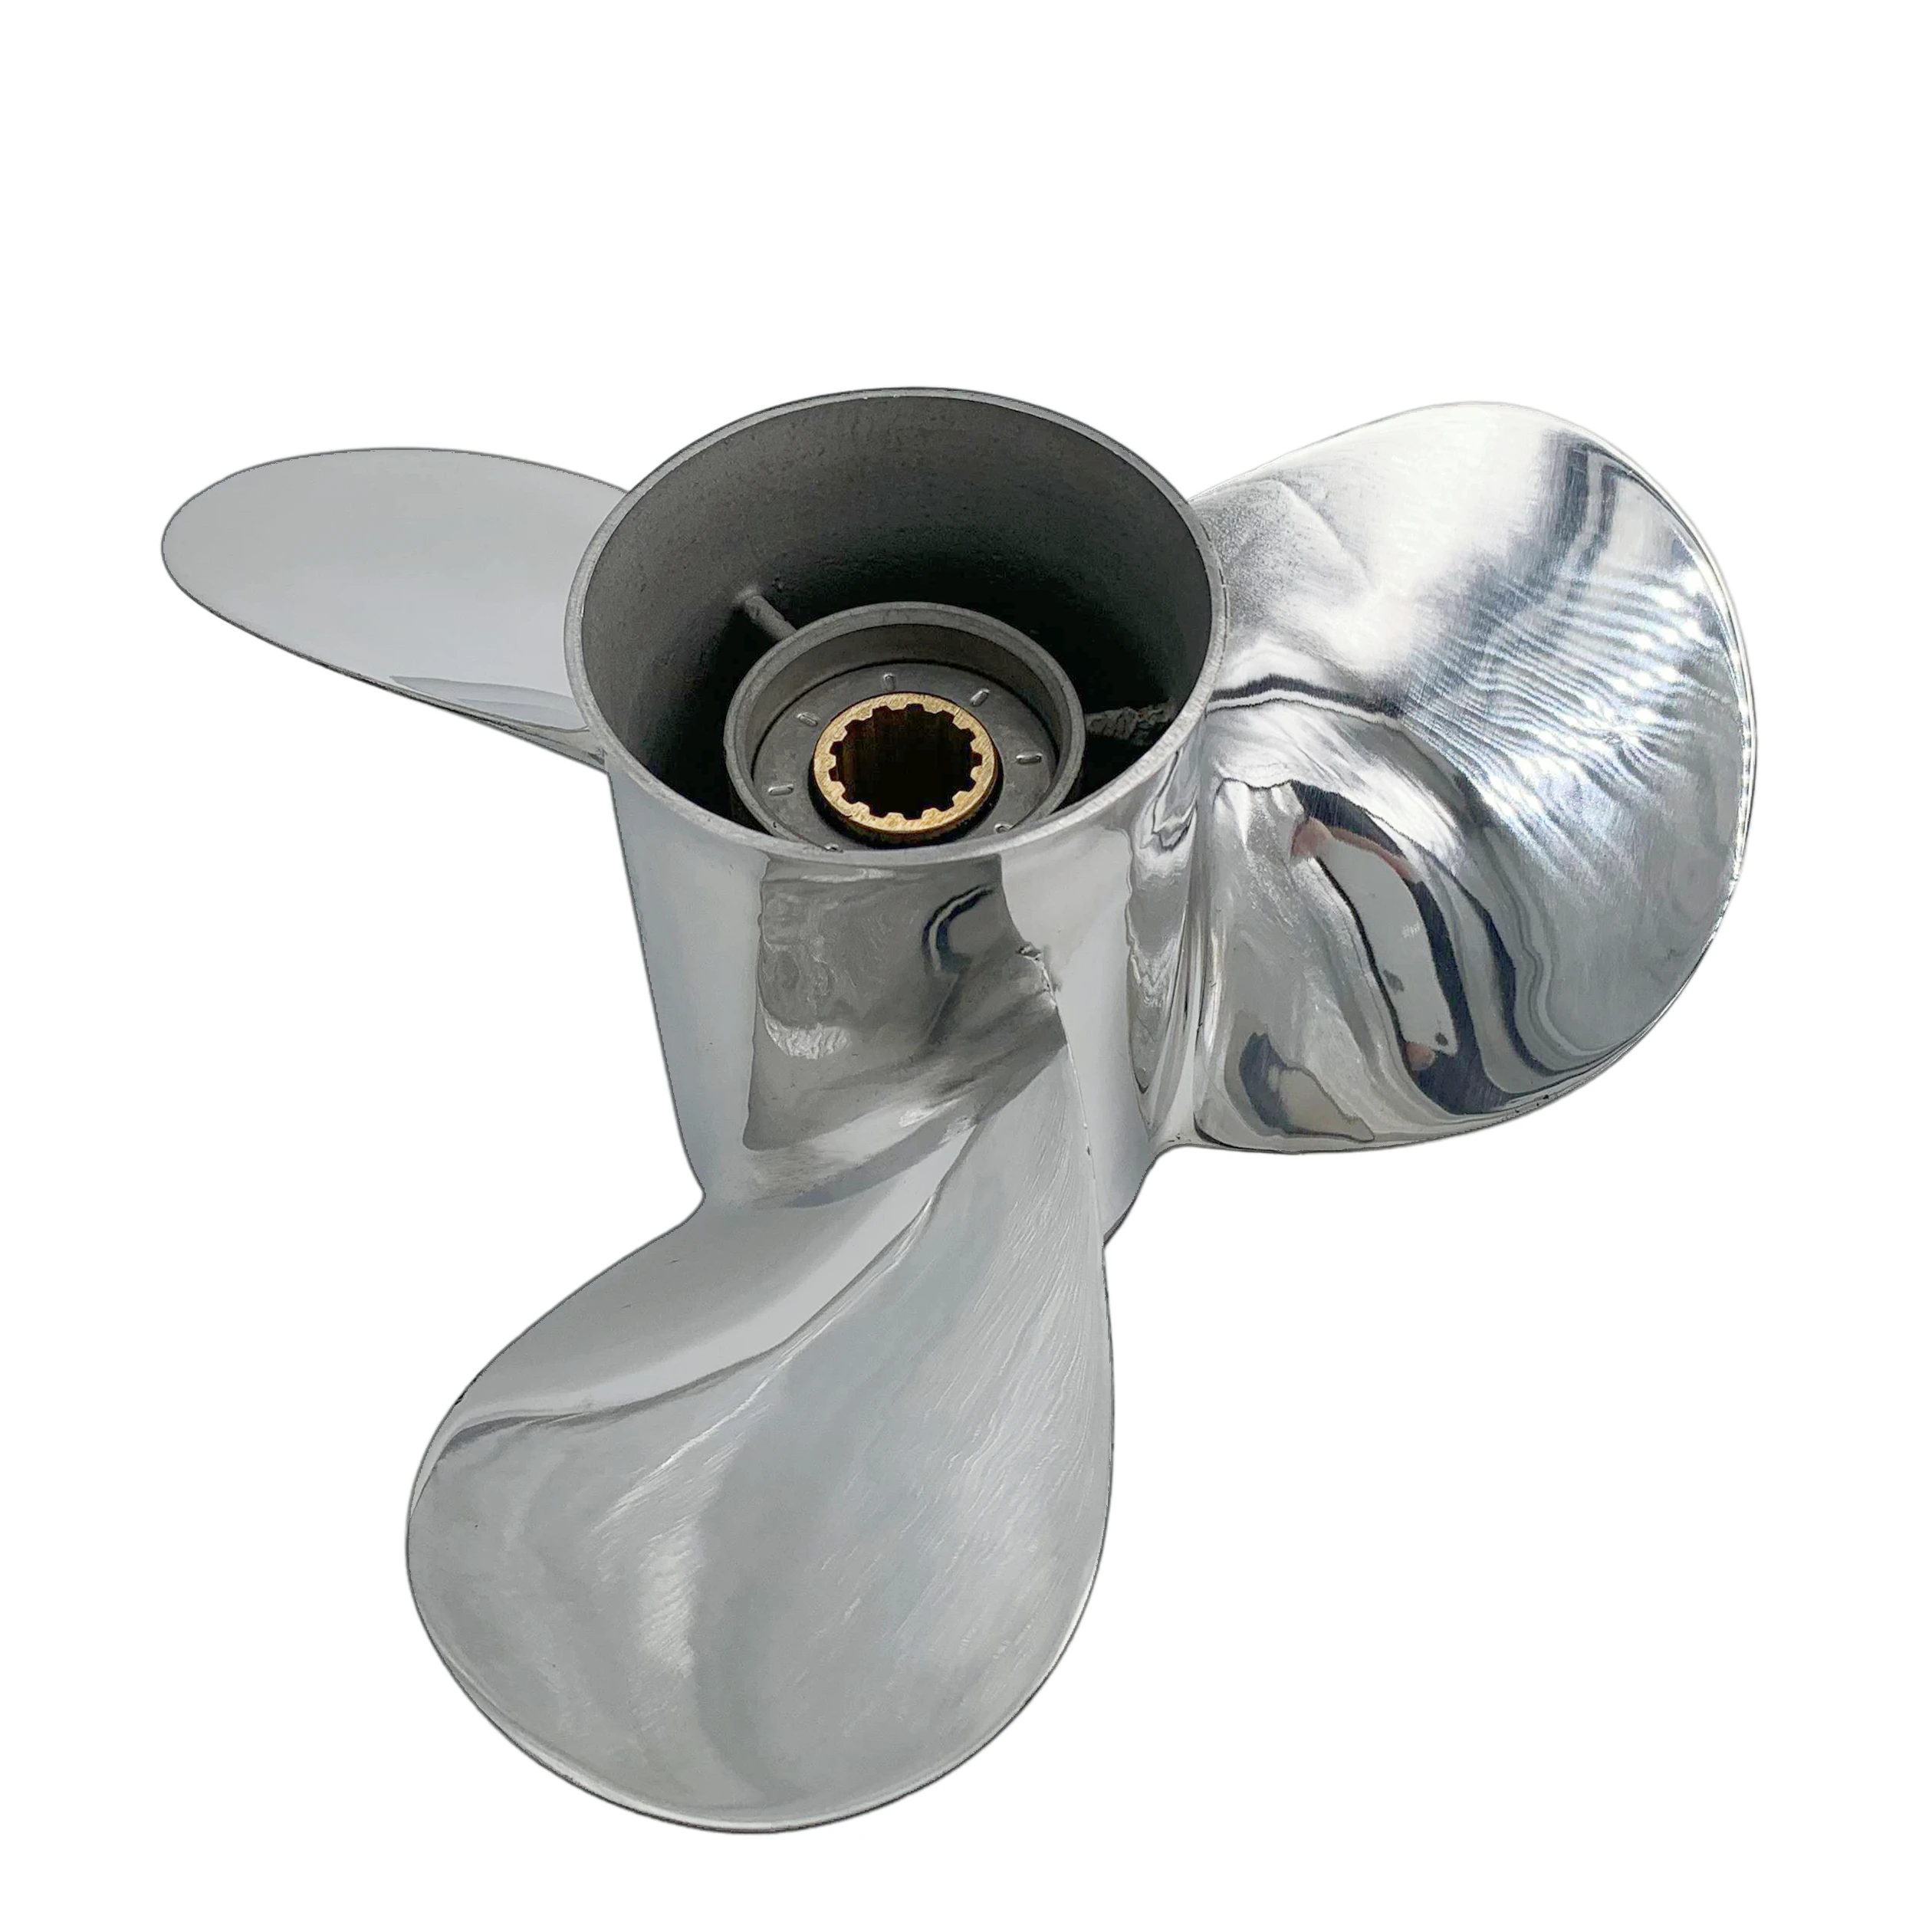 Boat Propeller 11x15 for Yamaha 40HP-55HP 3 Blades Stainless Steel Prop SS 13 Tooth RH OEM NO: 663-45943-01-EL 11x15